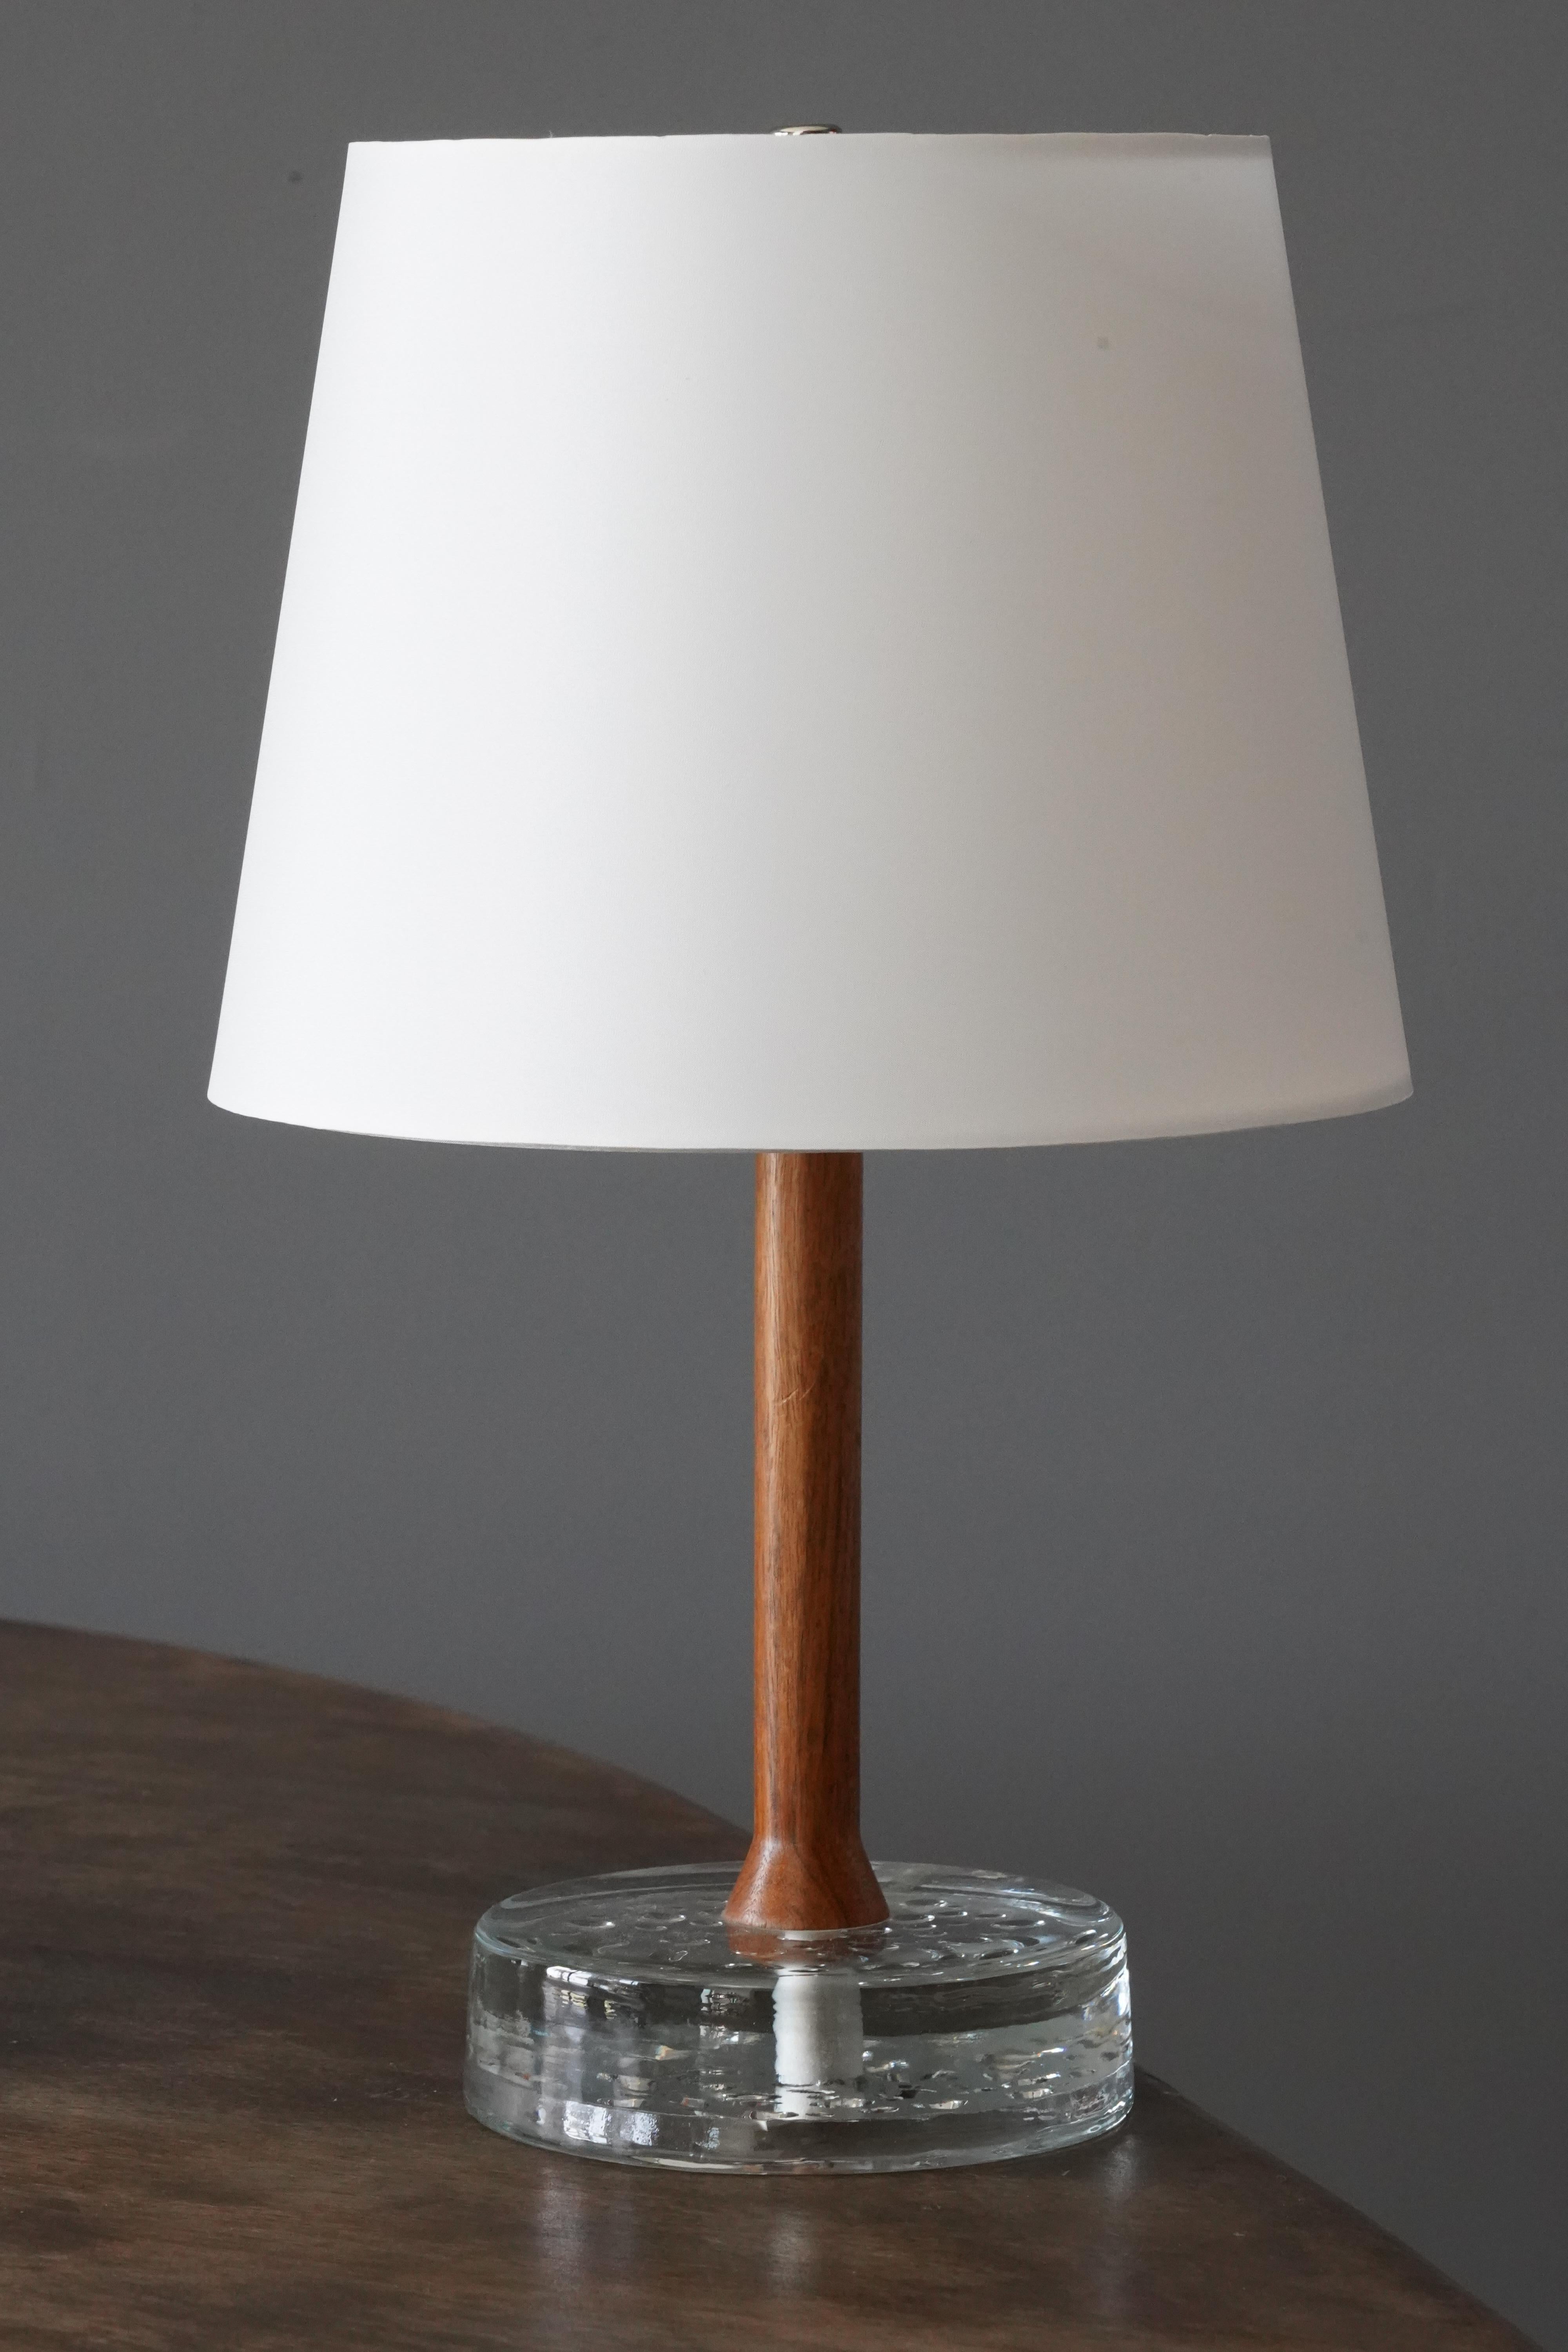 A table lamp, designed and produced in Sweden, c. 1960s. Features a blown glass base and a rosewood rod. 

Sold without lampshade, stated dimensions exclude lampshade, height includes socket.